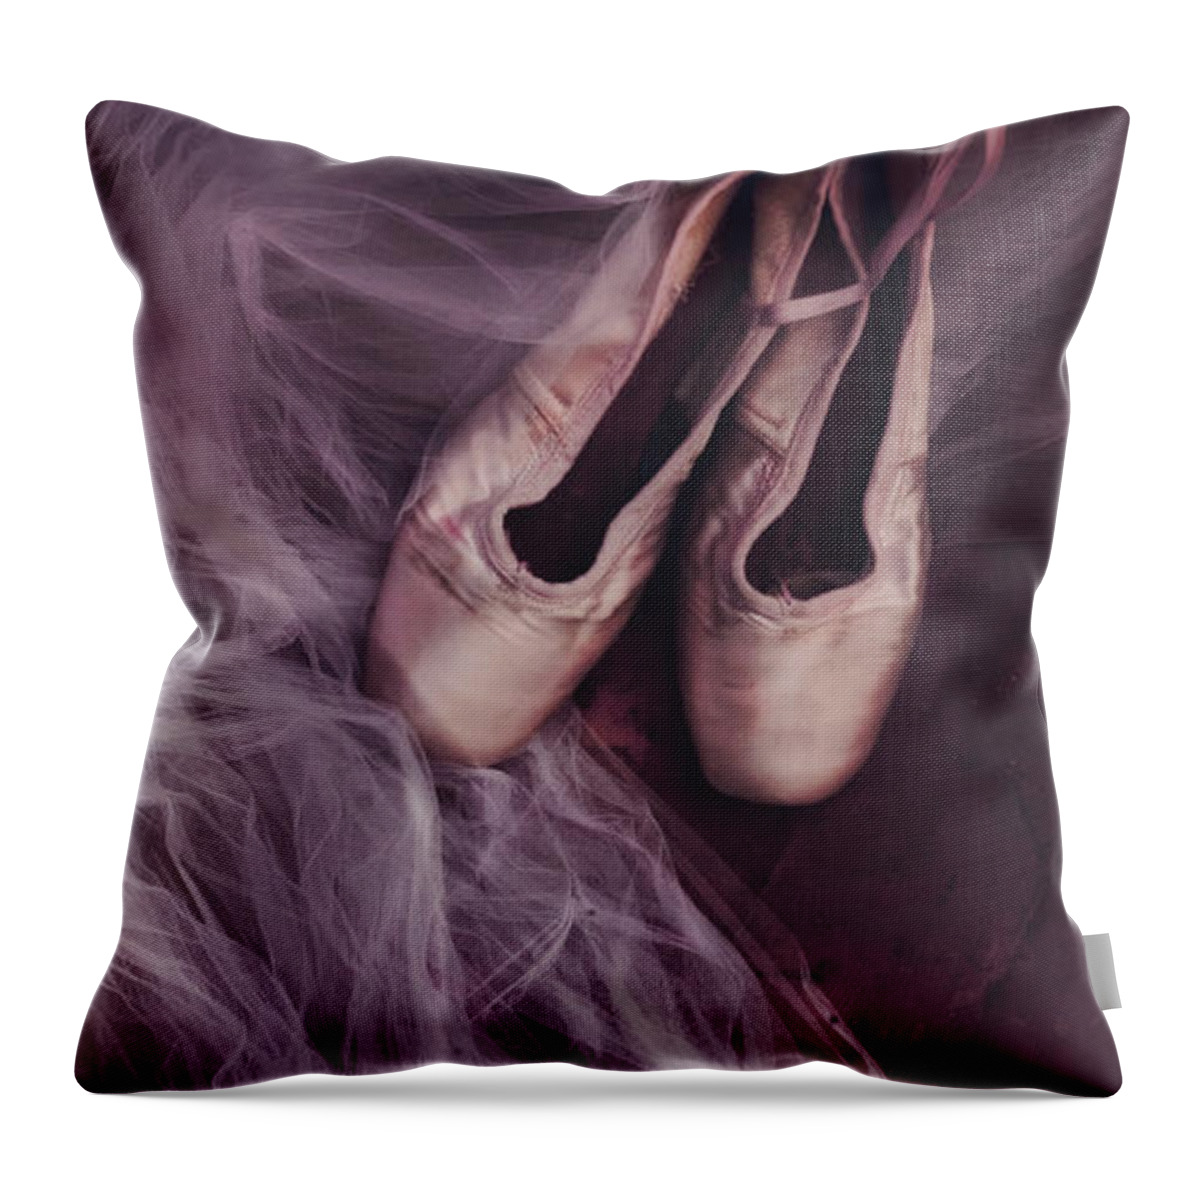 Shoes Throw Pillow featuring the photograph Danse Classique by Priska Wettstein